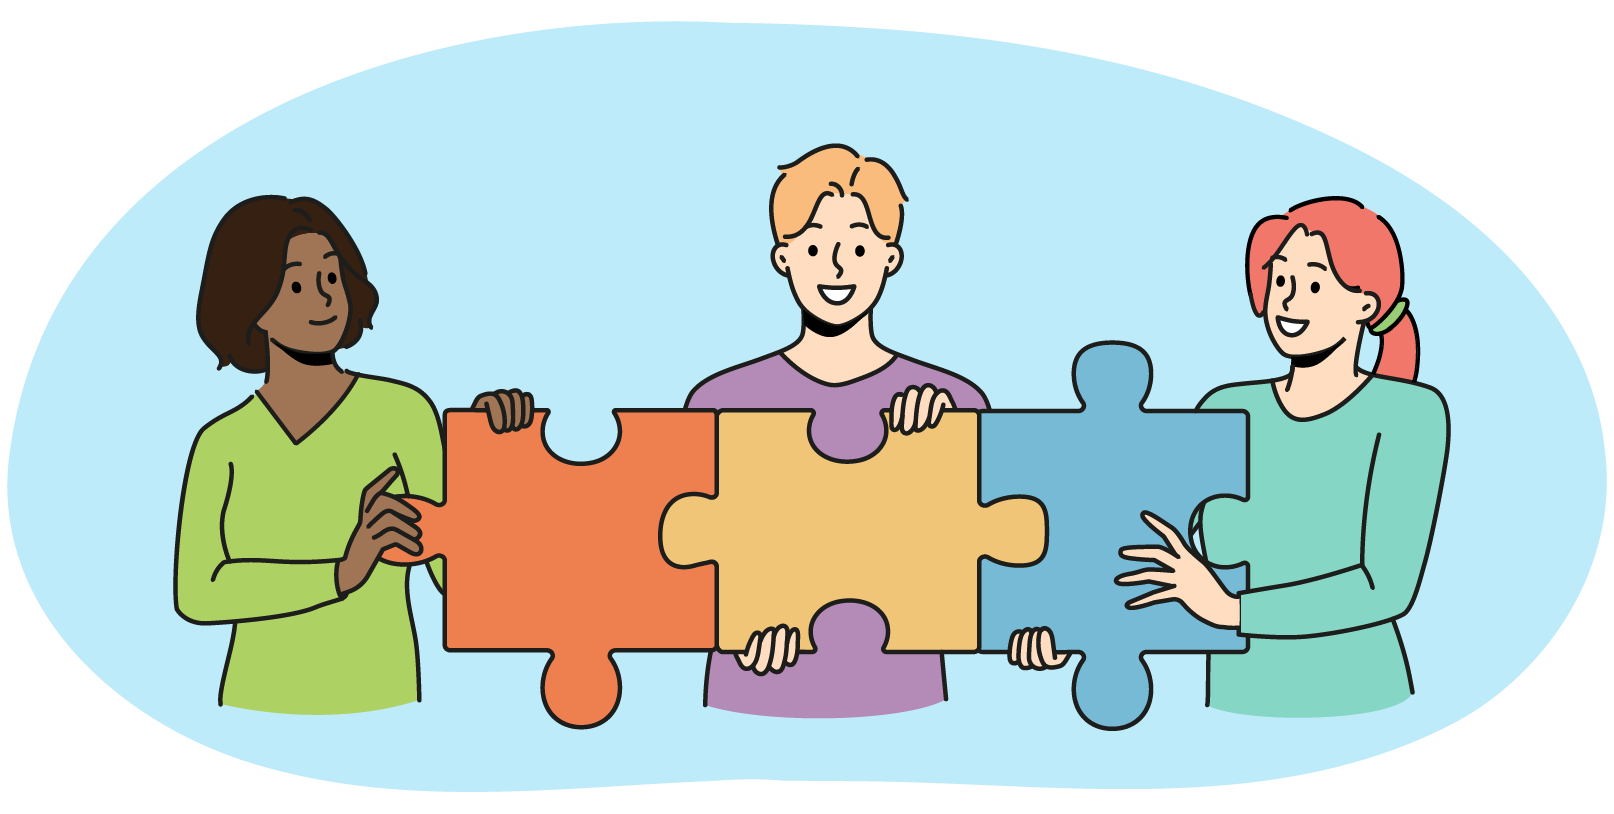 The same group of people from the first image showing off a completed set of puzzle pieces, having successfully solved the problem